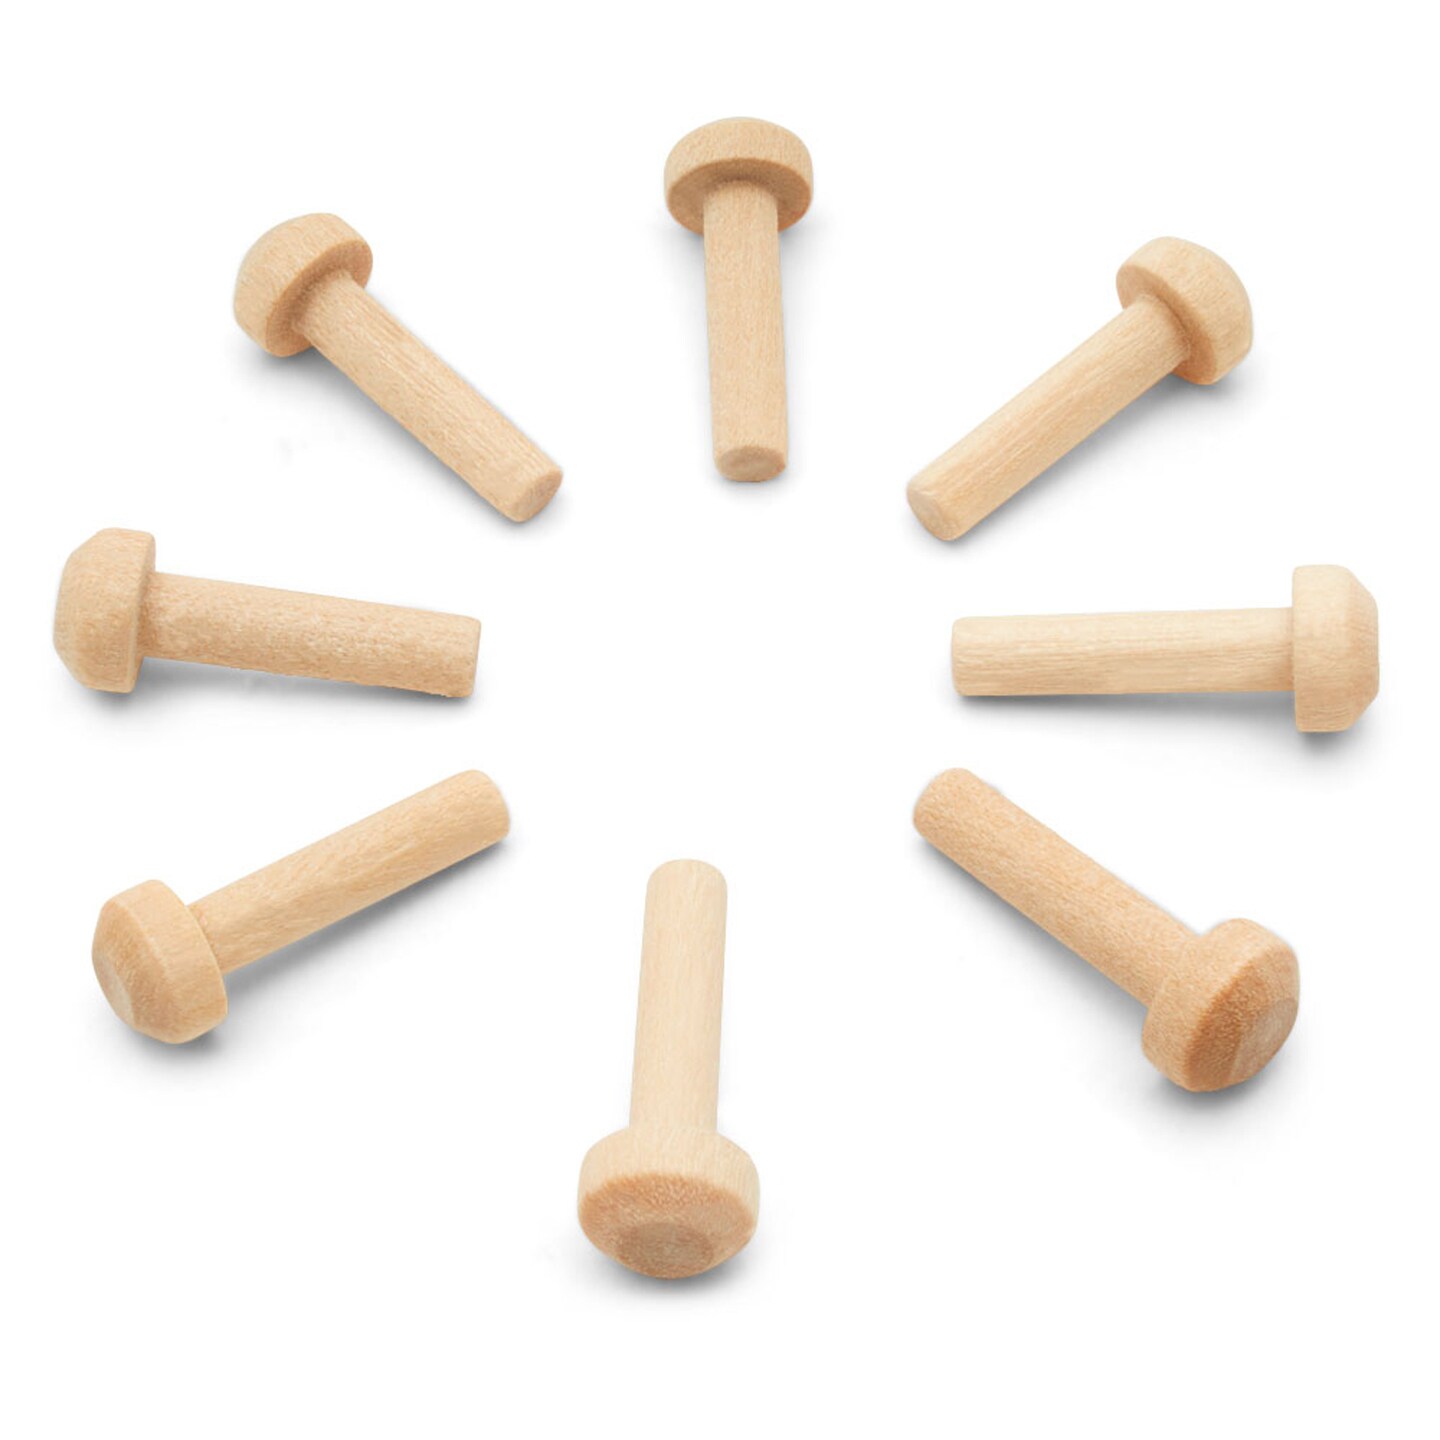 Wood Axle Pegs Multiple Sizes Available, Mini Wood Train Craft Parts for Wood Wheels | Woodpeckers